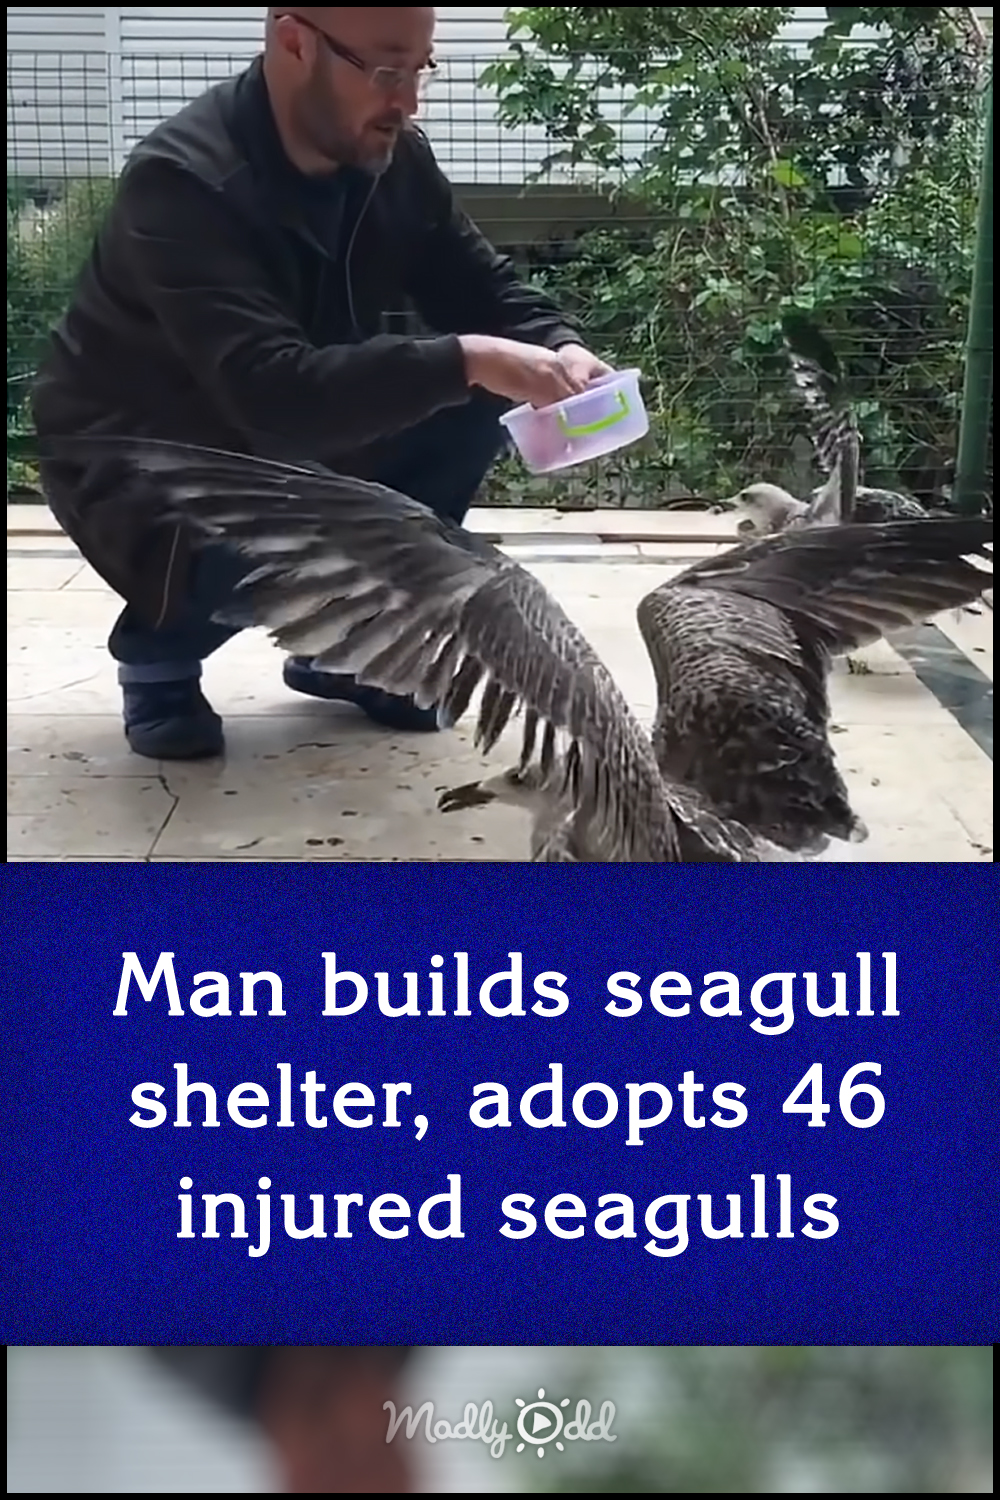 Man builds seagull shelter, adopts 46 injured seagulls